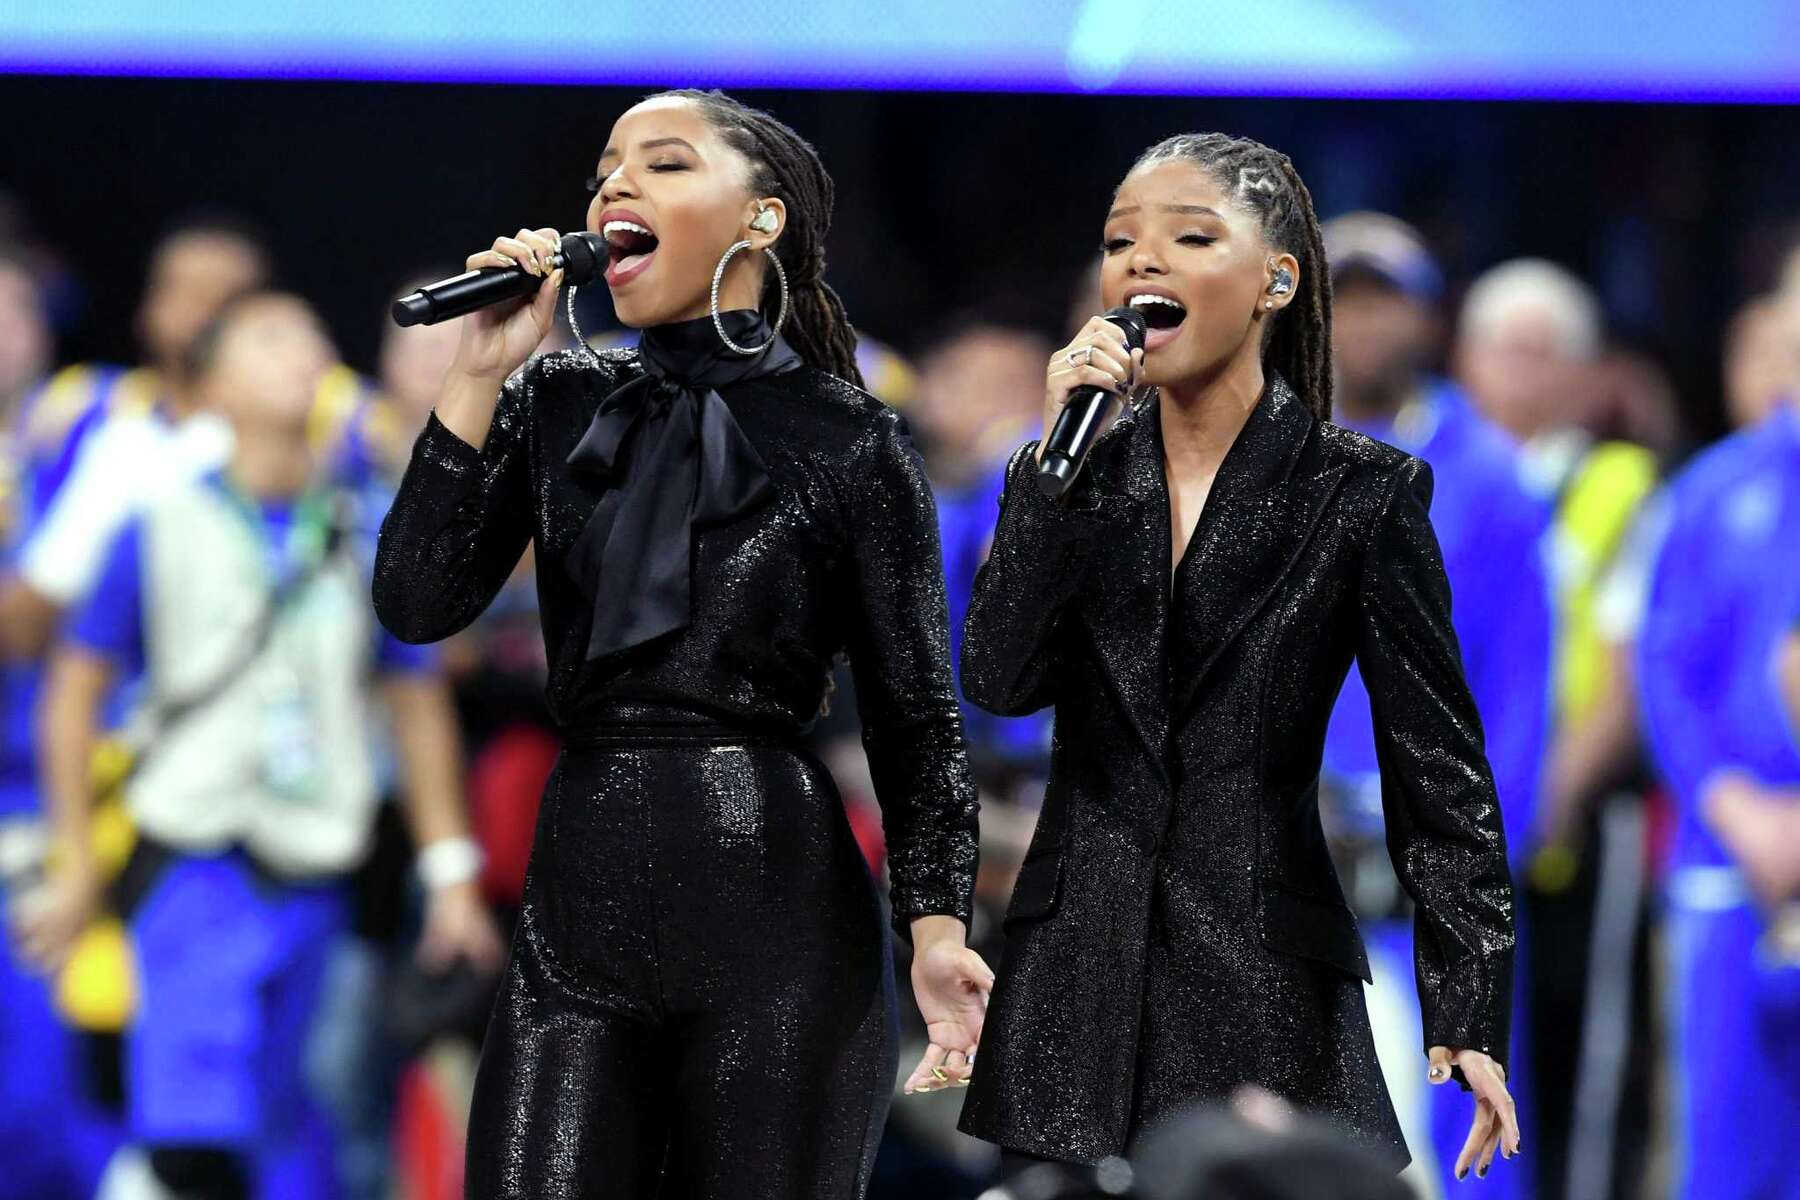 Chloe And Halle Bailey Who Call Beyonce Mentor Up For Grammys